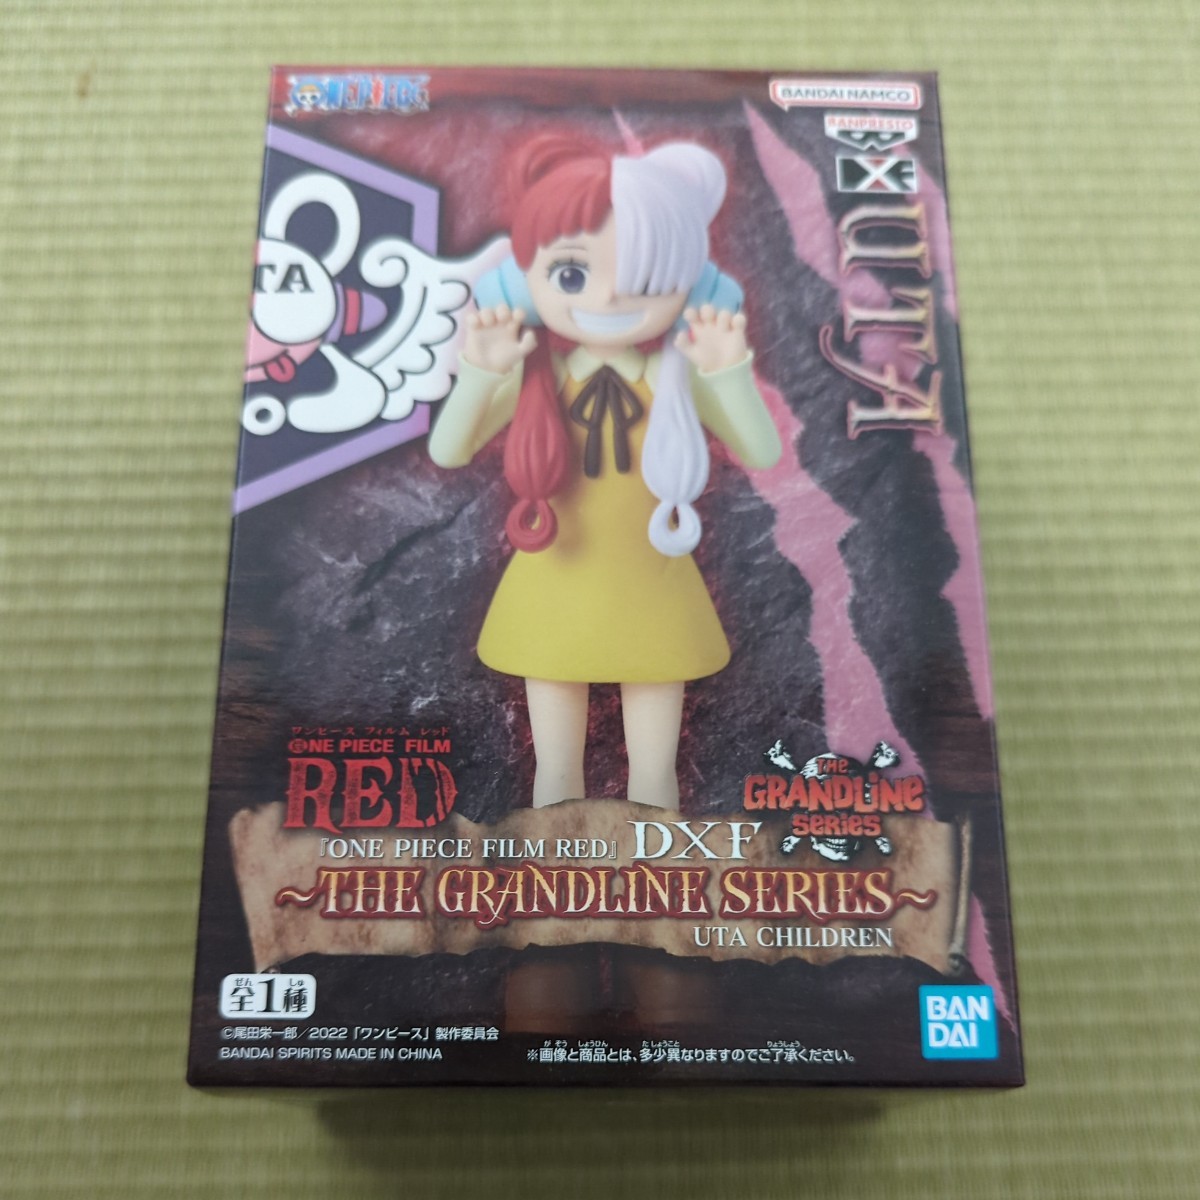 red rising series | JChere Japanese Proxy Service